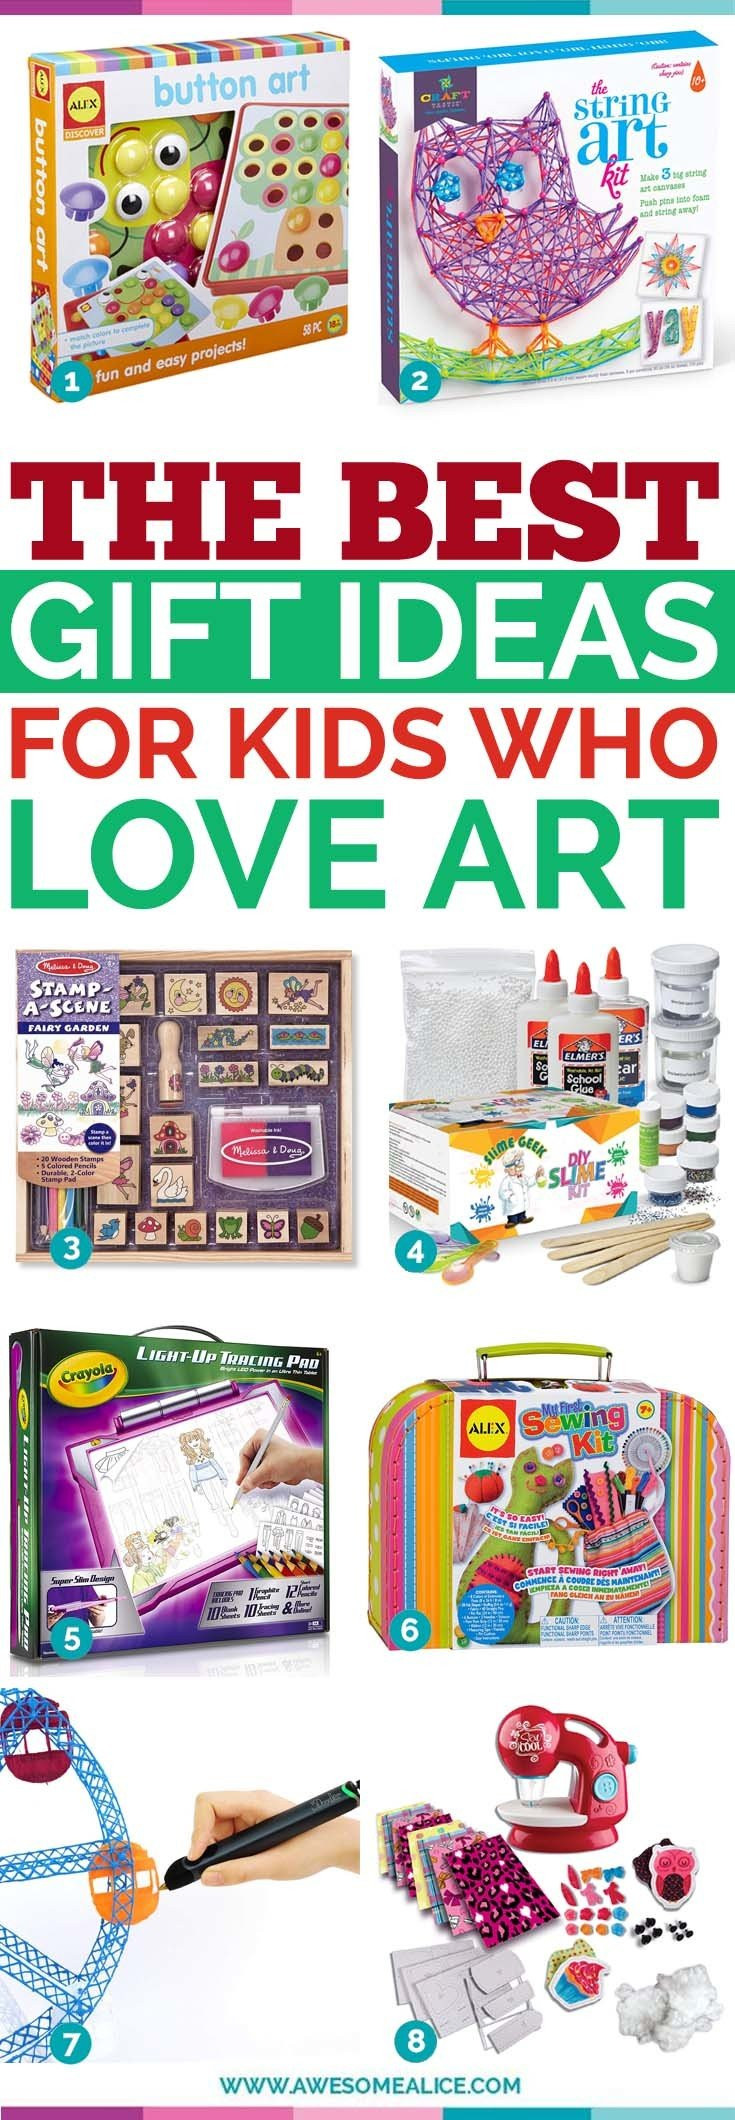 Art Gifts For Kids
 Top 30 Gift Ideas for Creative Kids Who Love Art